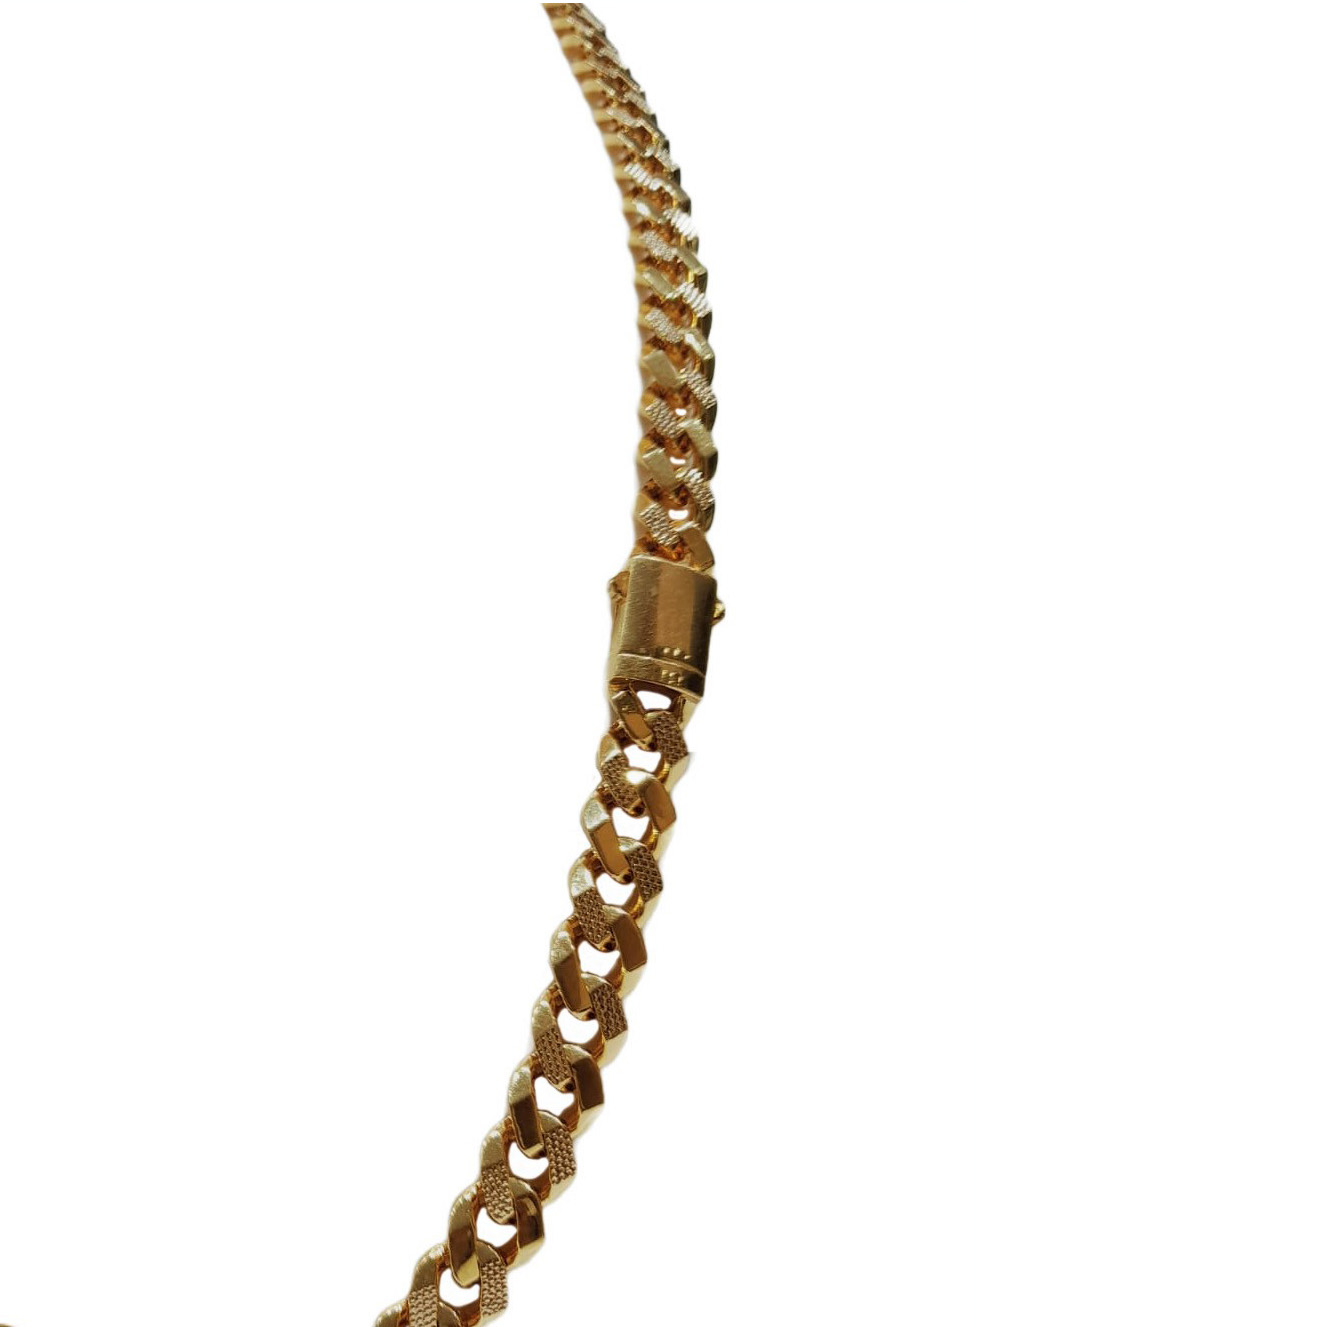 Stunning Dubai Men's Cuban Link Chain Necklace In 916 Stamped 22K Yellow  Gold | eBay